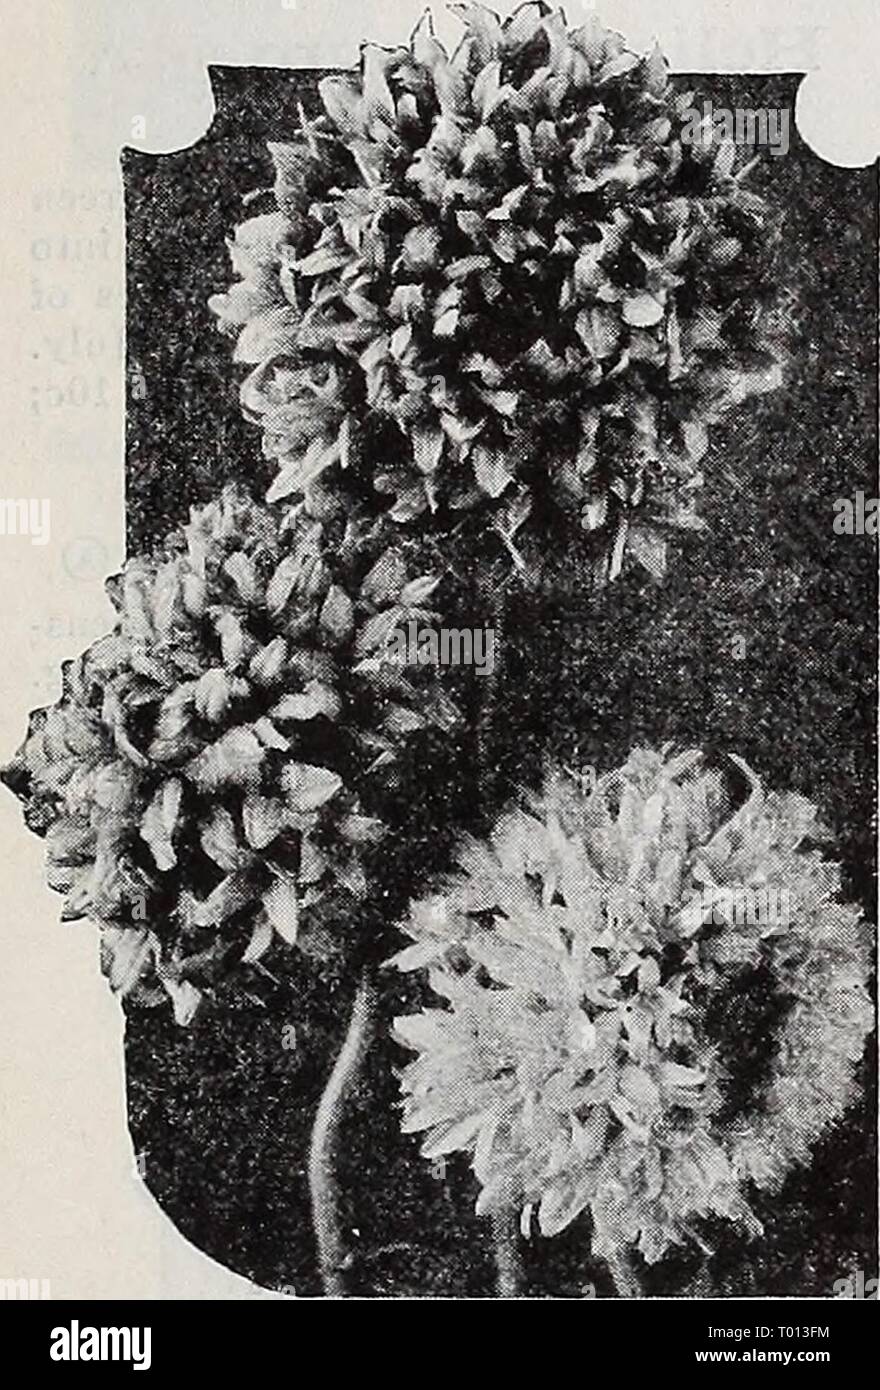 Dreer's garden book 1939 : 101 years of Dreer quality seeds plants bulbs . dreersgardenbook1939henr Year: 1939  Dreer's Reliable FLOWER SEEDS Gaillardia—B/an/;ef Flower Annual Varieties ® Exceedingly showy flowers produced continuously from early summer until November. Excellent for beds, borders, and cutting. Sow where to bloom. Ij feet high. 2427 Picta, Indian Chief. Glistening metallic bronzy red with dark center. Single. Pkt. 10c; i oz. 2Sc. 2430 Single Mixed. Includes many iine colors. Pkt. 10c; j oz. 25c.    Double-Flowering Gaillardia 2432 Houhle Mixed {Lorenziana). Very showy, fully do Stock Photo